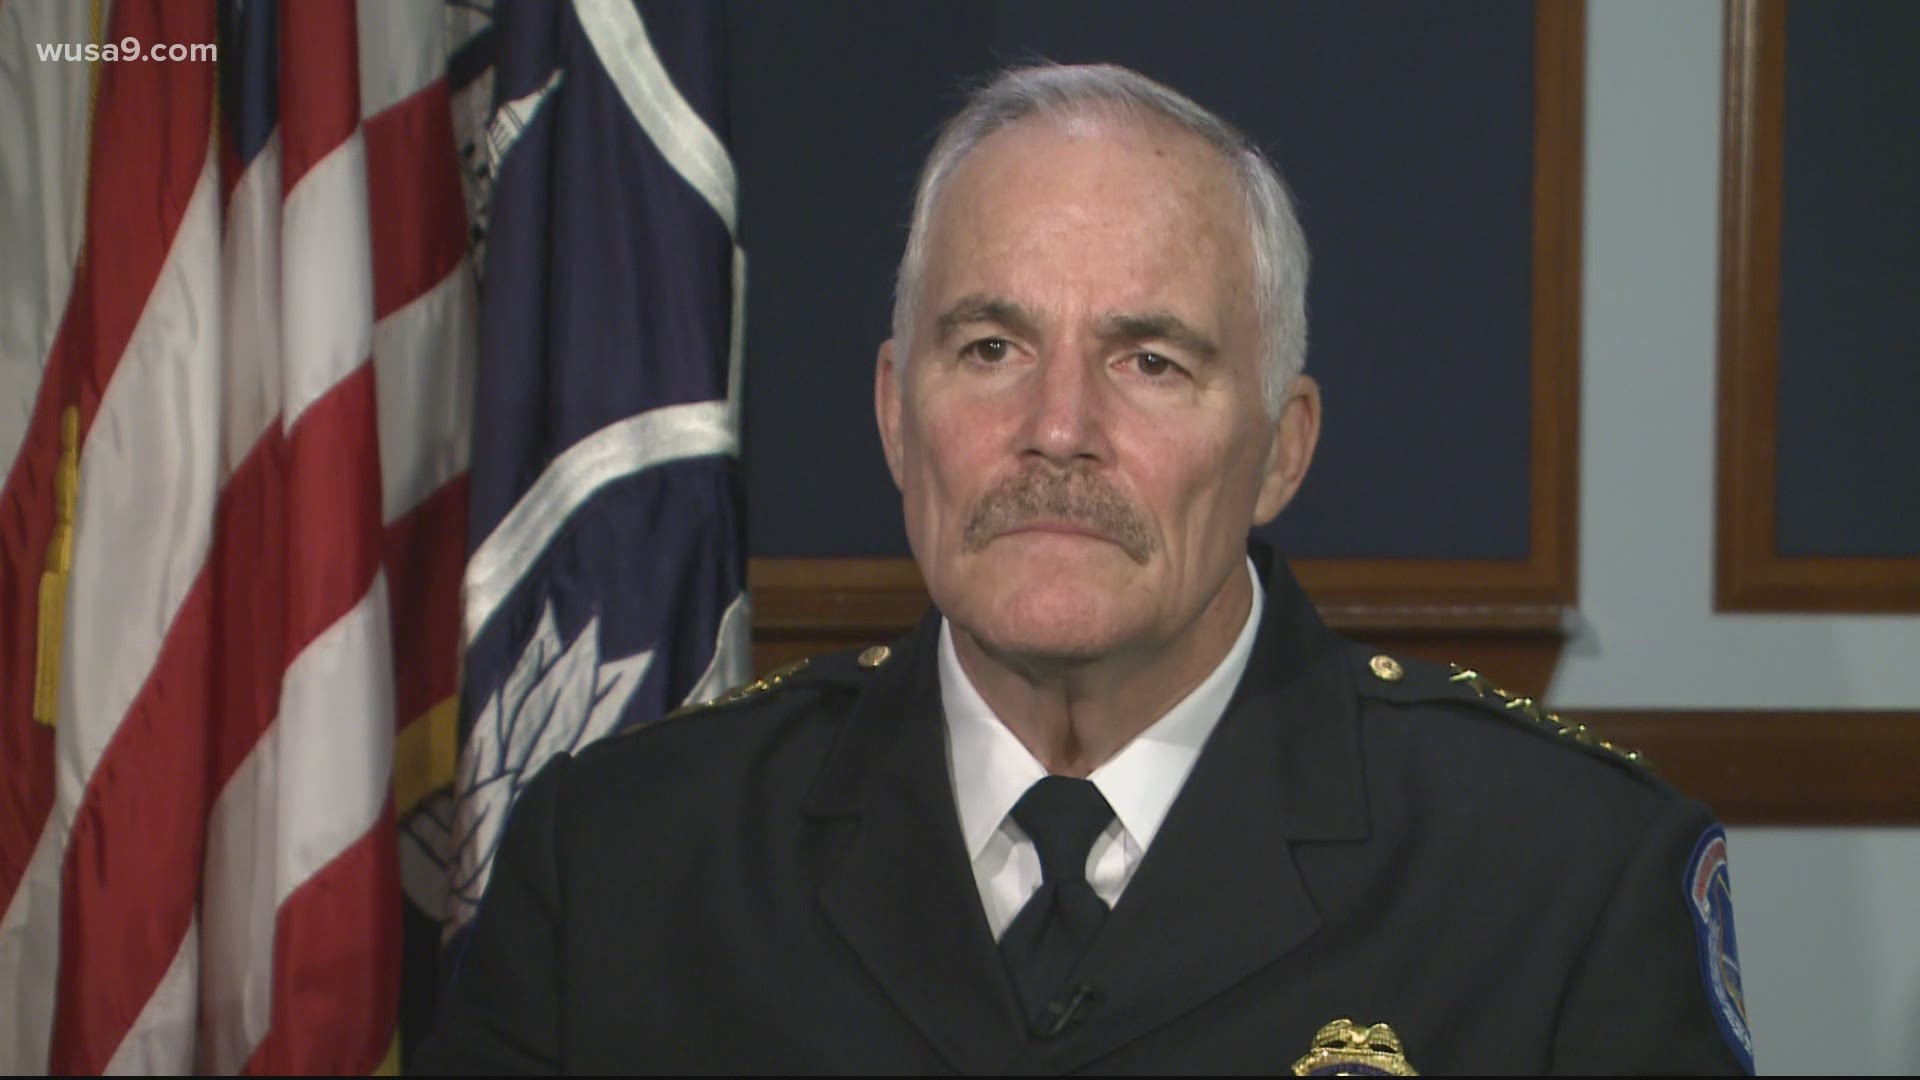 Capitol Police have a new chief following an extensive nationwide search.